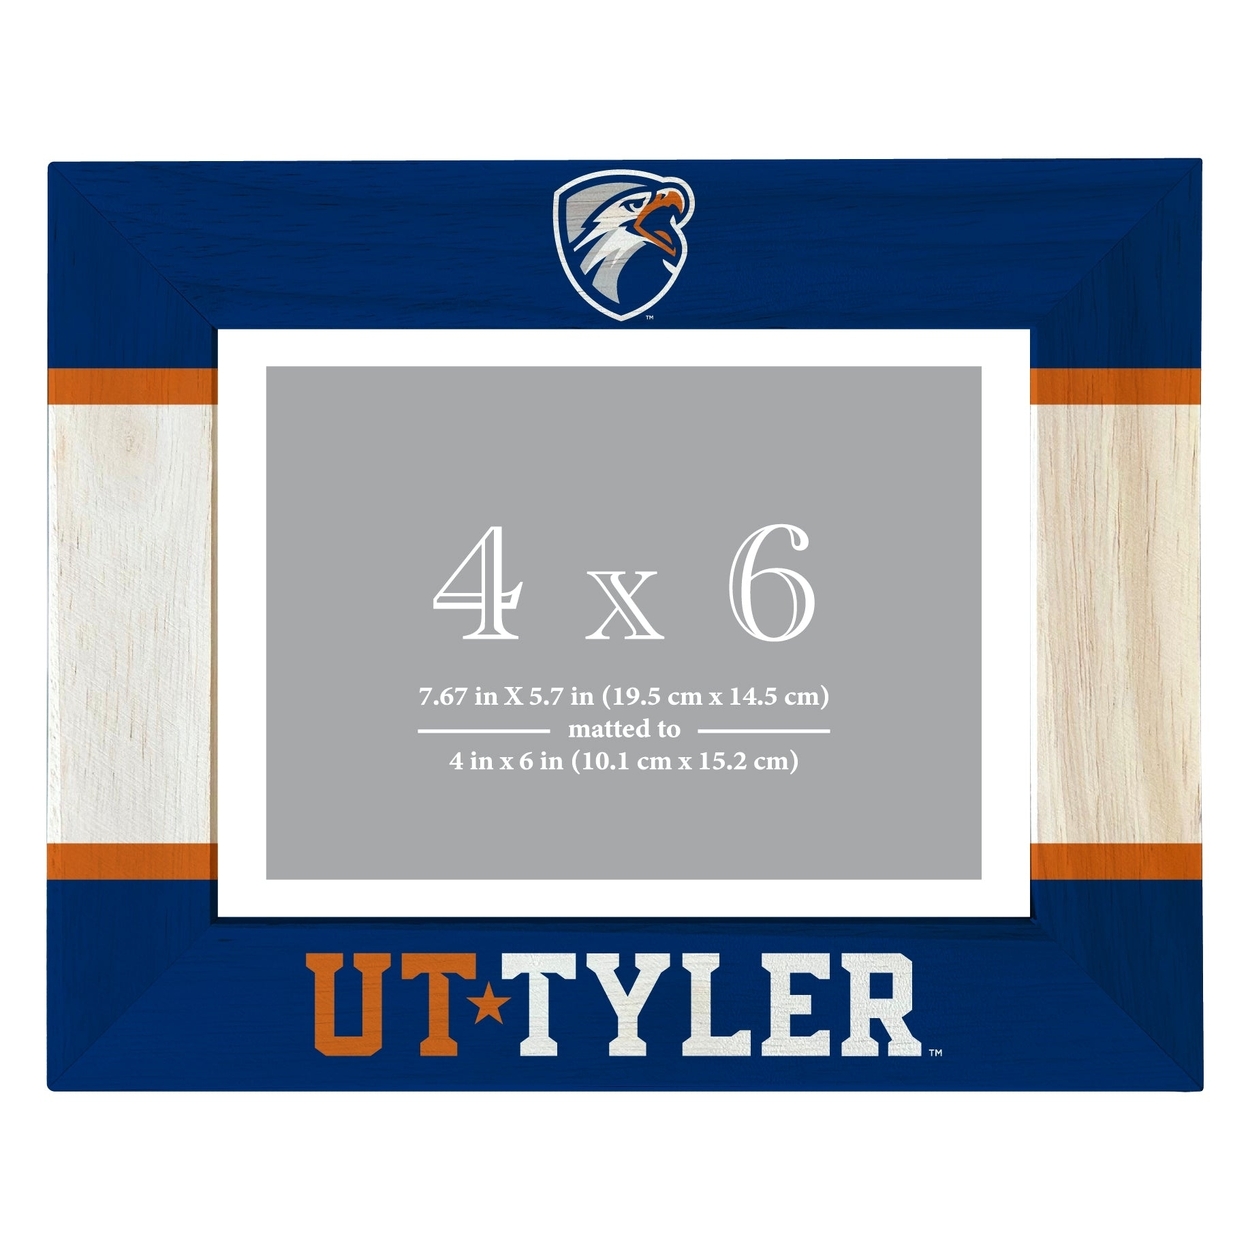 The University Of Texas At Tyler Wooden Photo Frame Matted To 4 X 6 Inch - Printed